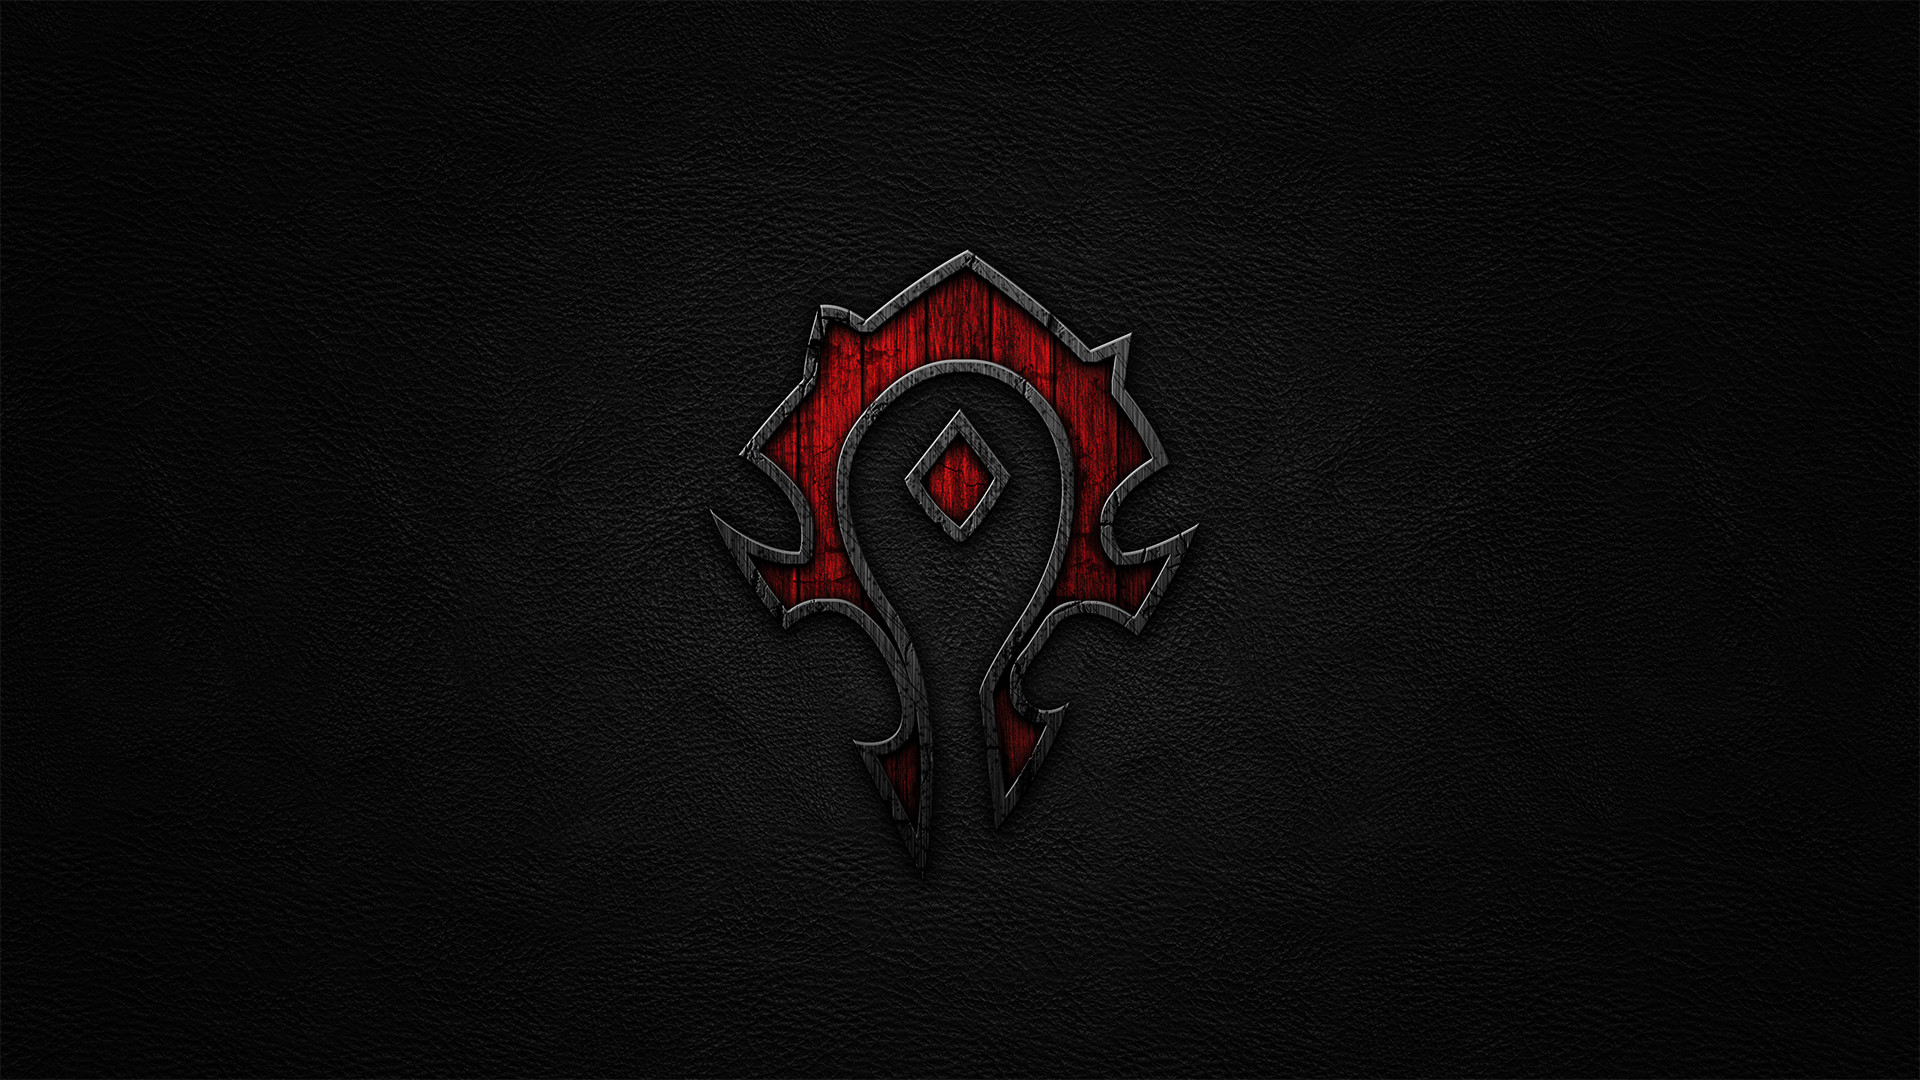 Horde Wallpapers (66+ pictures)